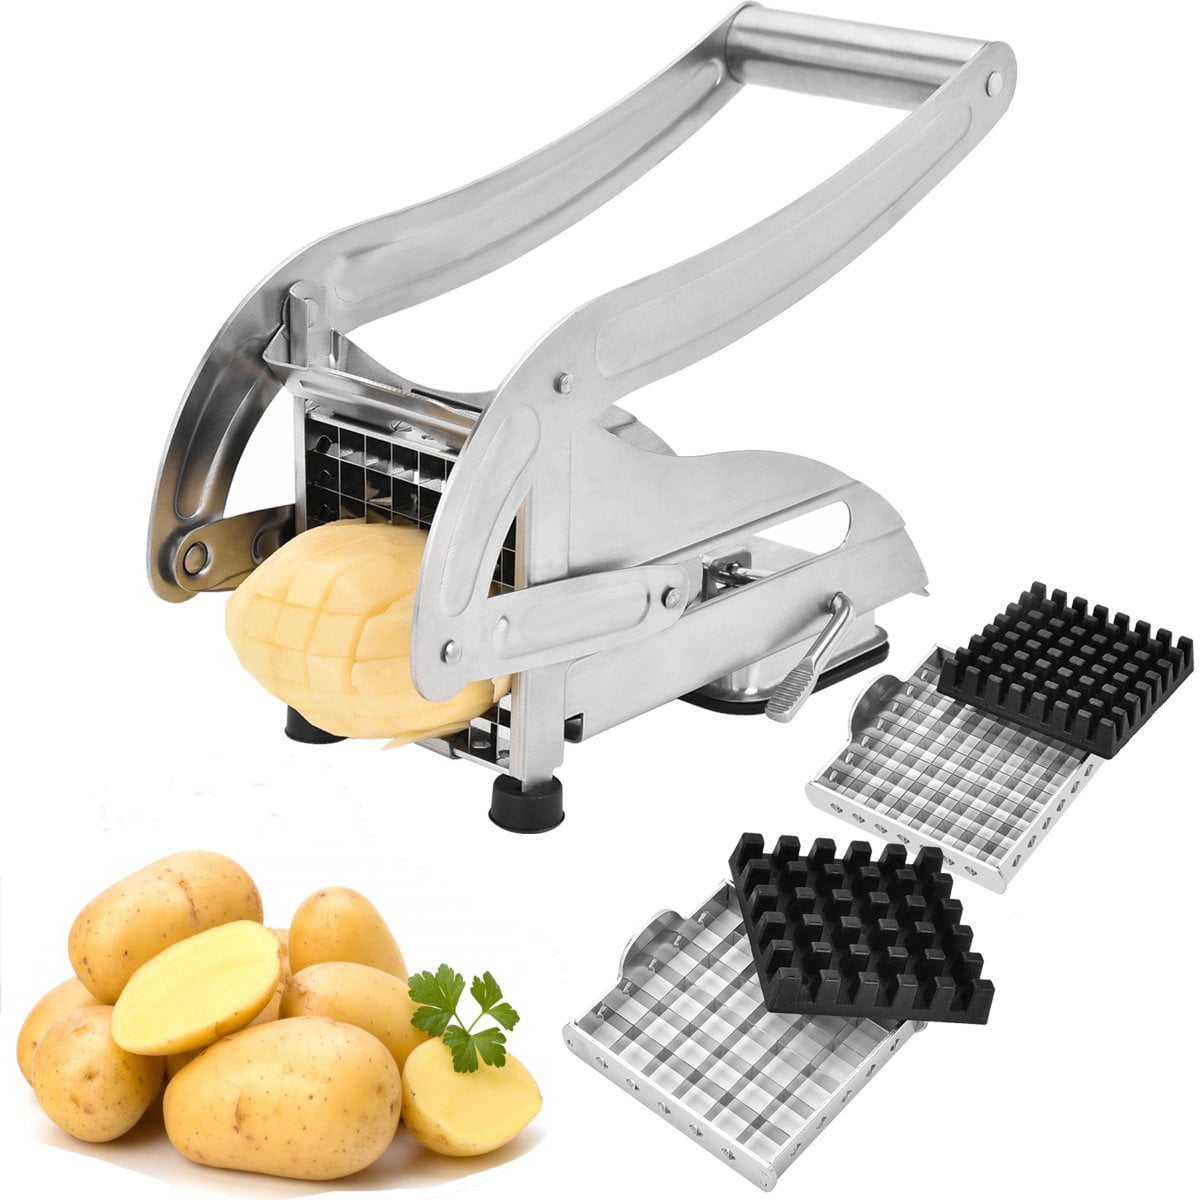 White Details about   Norpro Blooming Onion Blossom Maker Flower Fry Slicer With Core Remover 